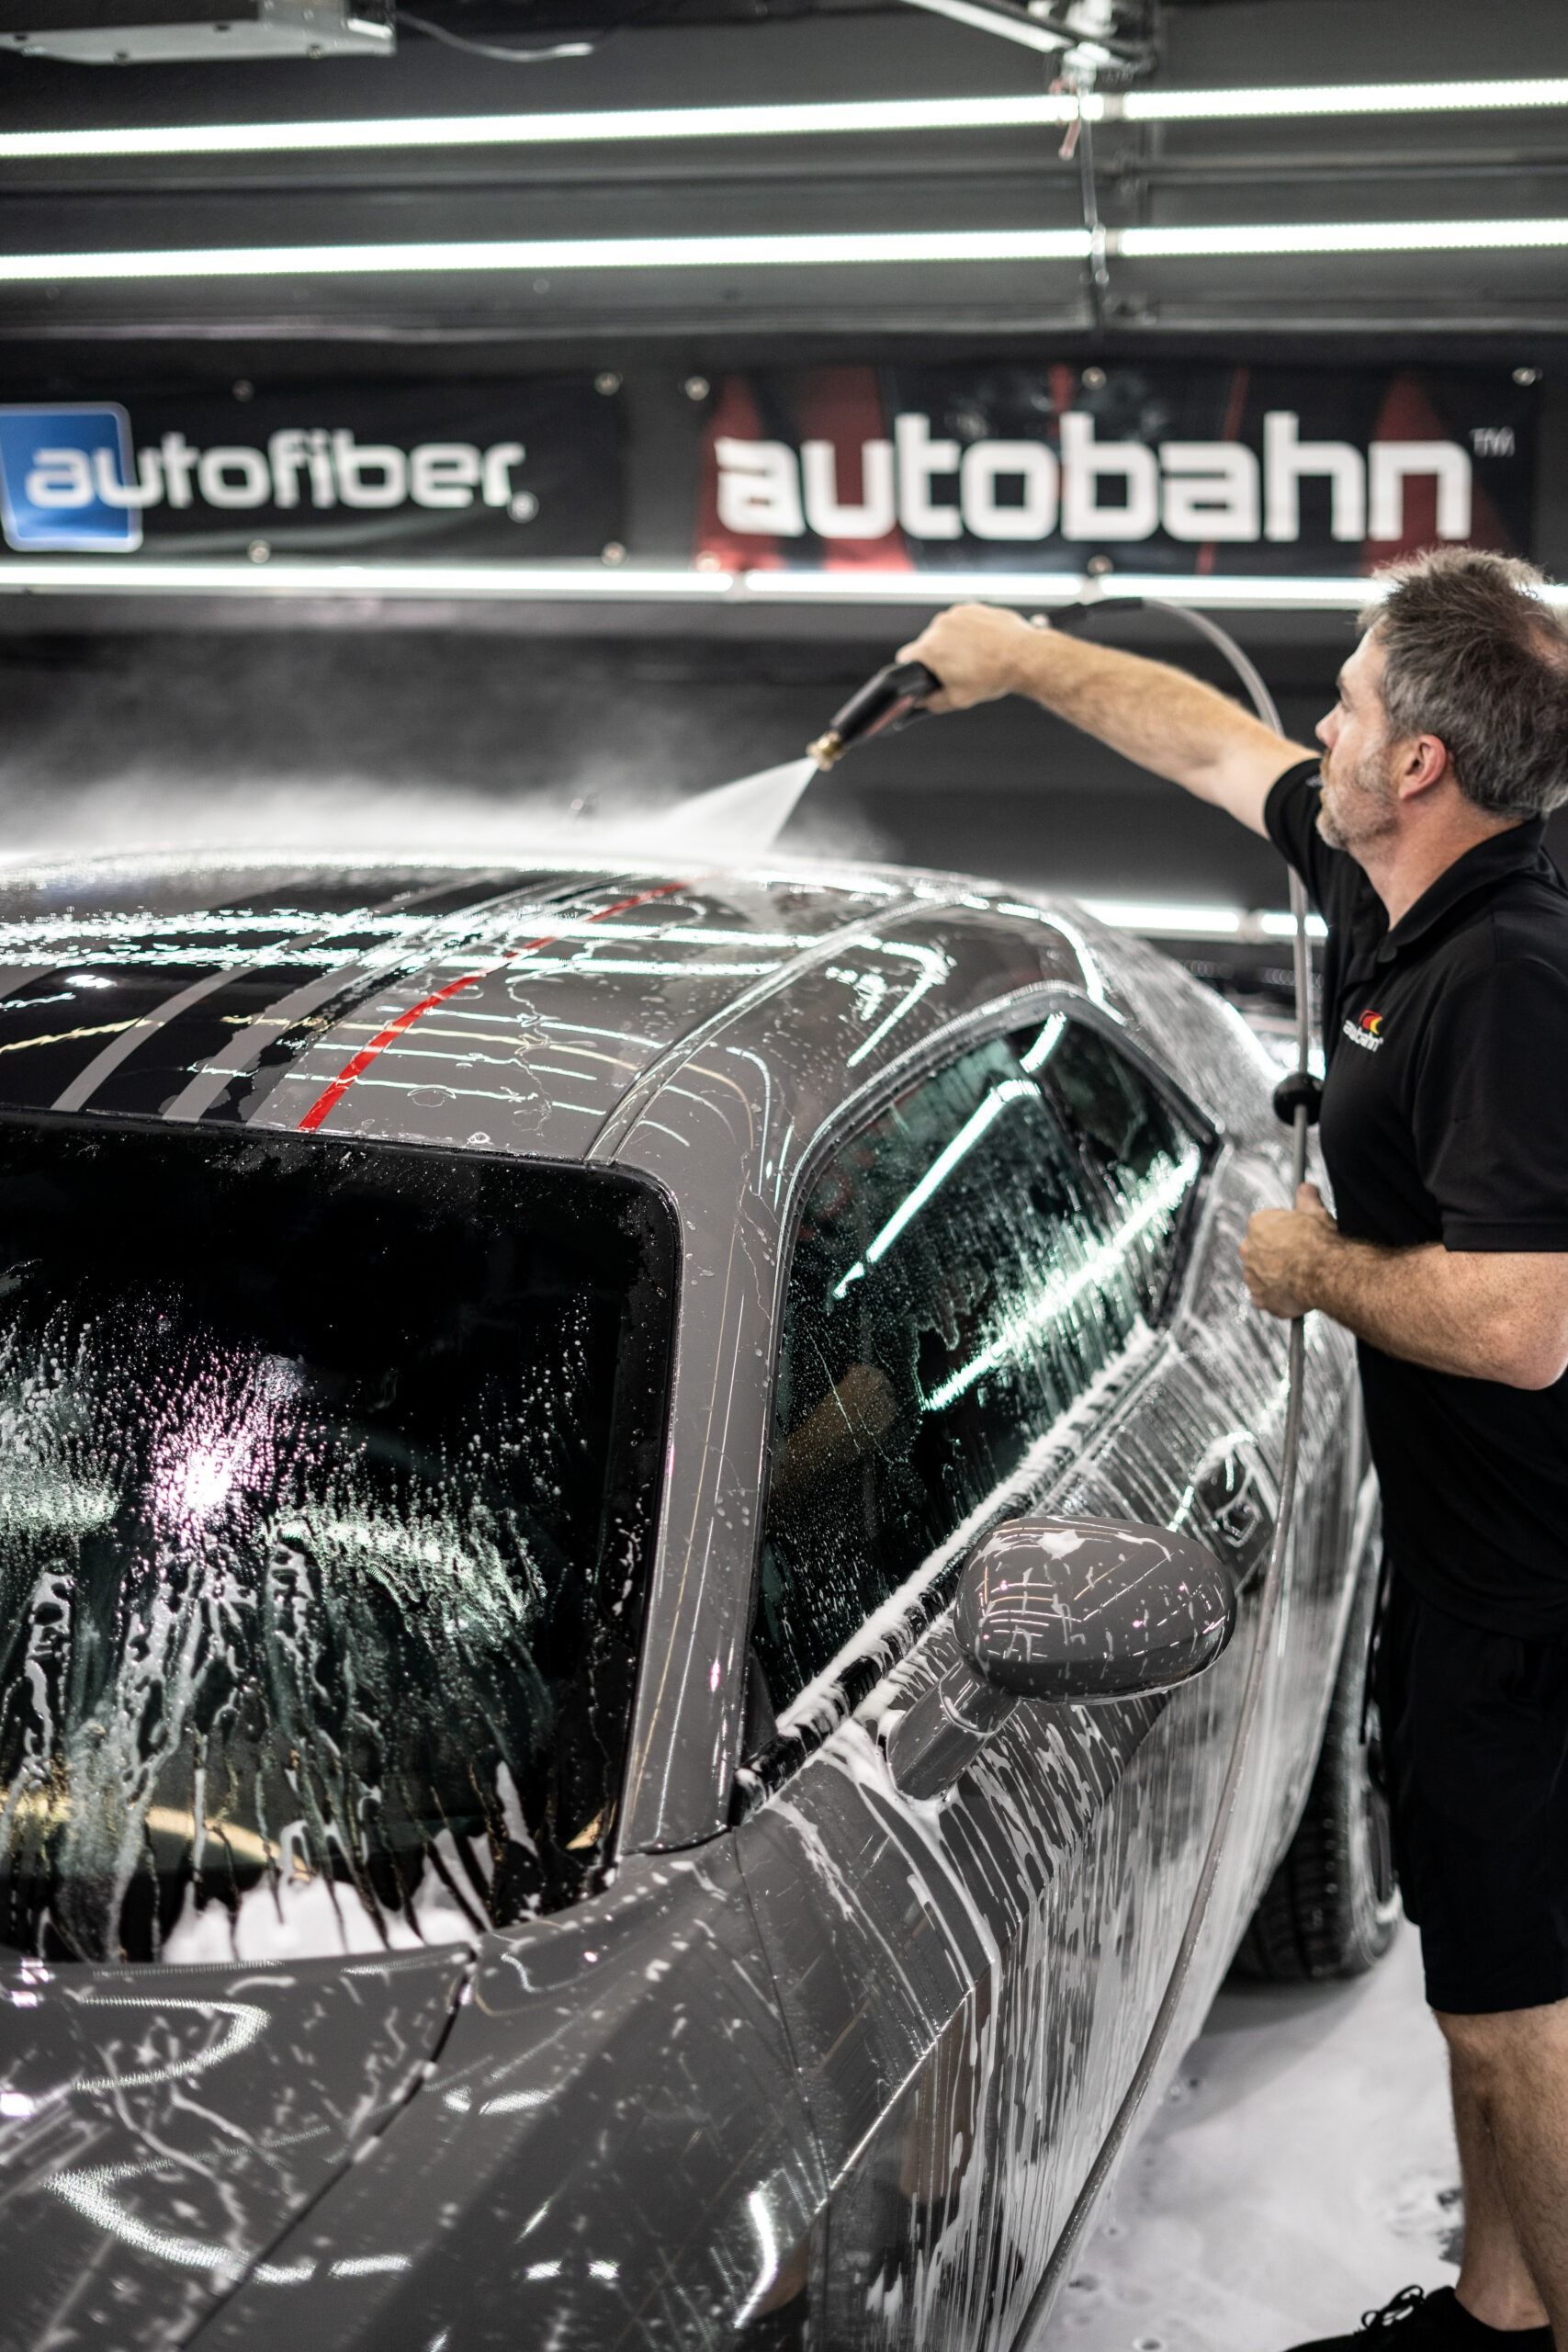 A man is washing a car with a high pressure washer.